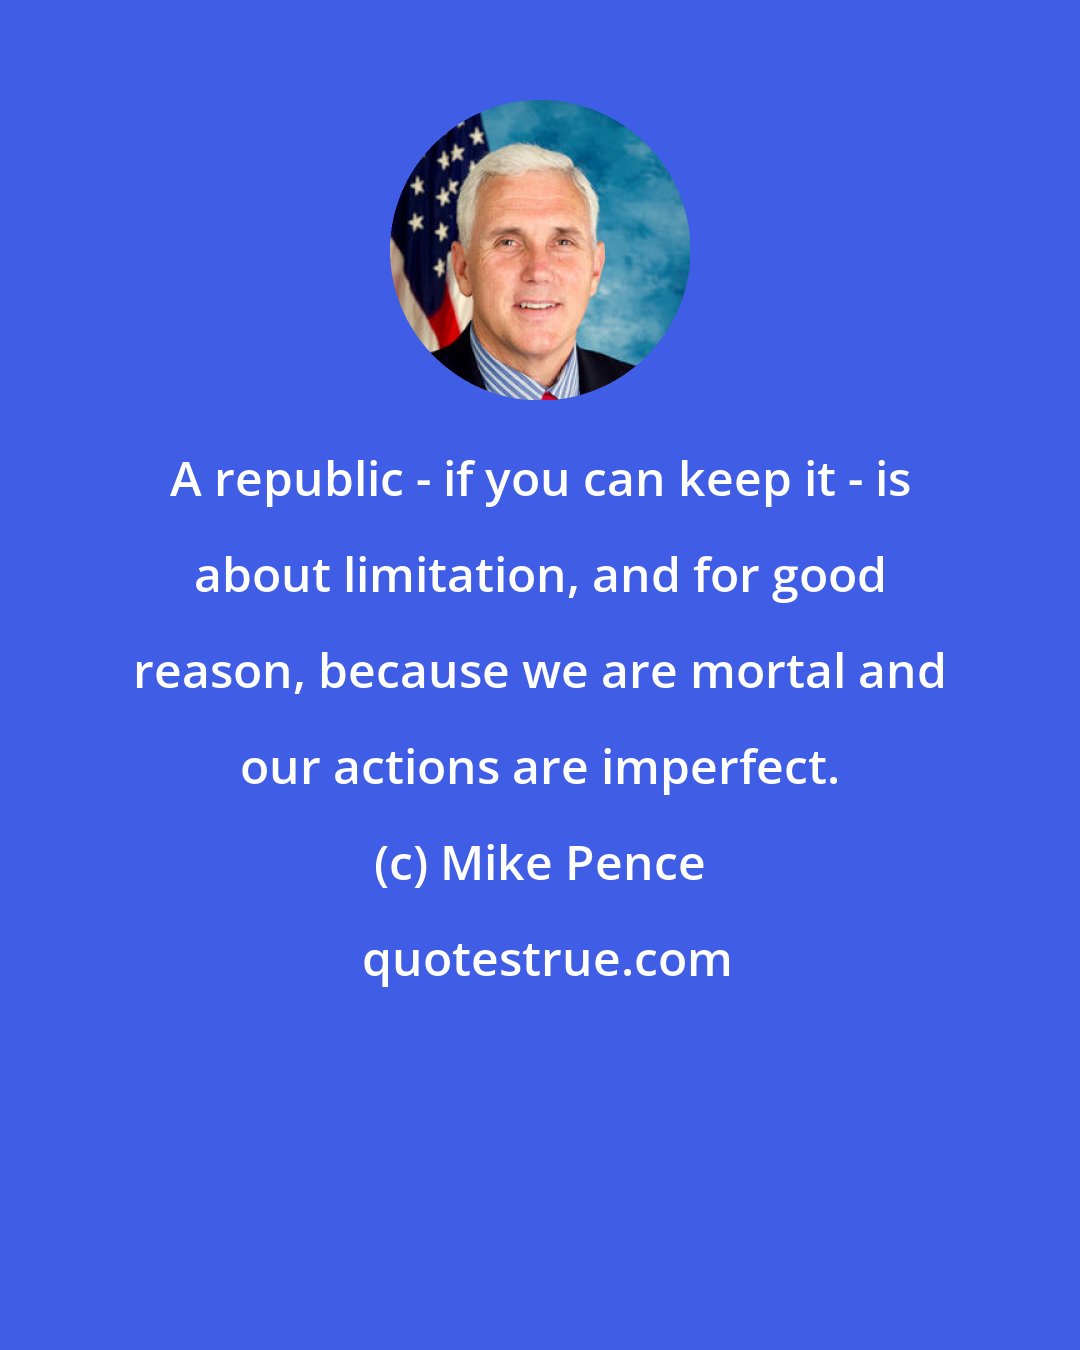 Mike Pence: A republic - if you can keep it - is about limitation, and for good reason, because we are mortal and our actions are imperfect.